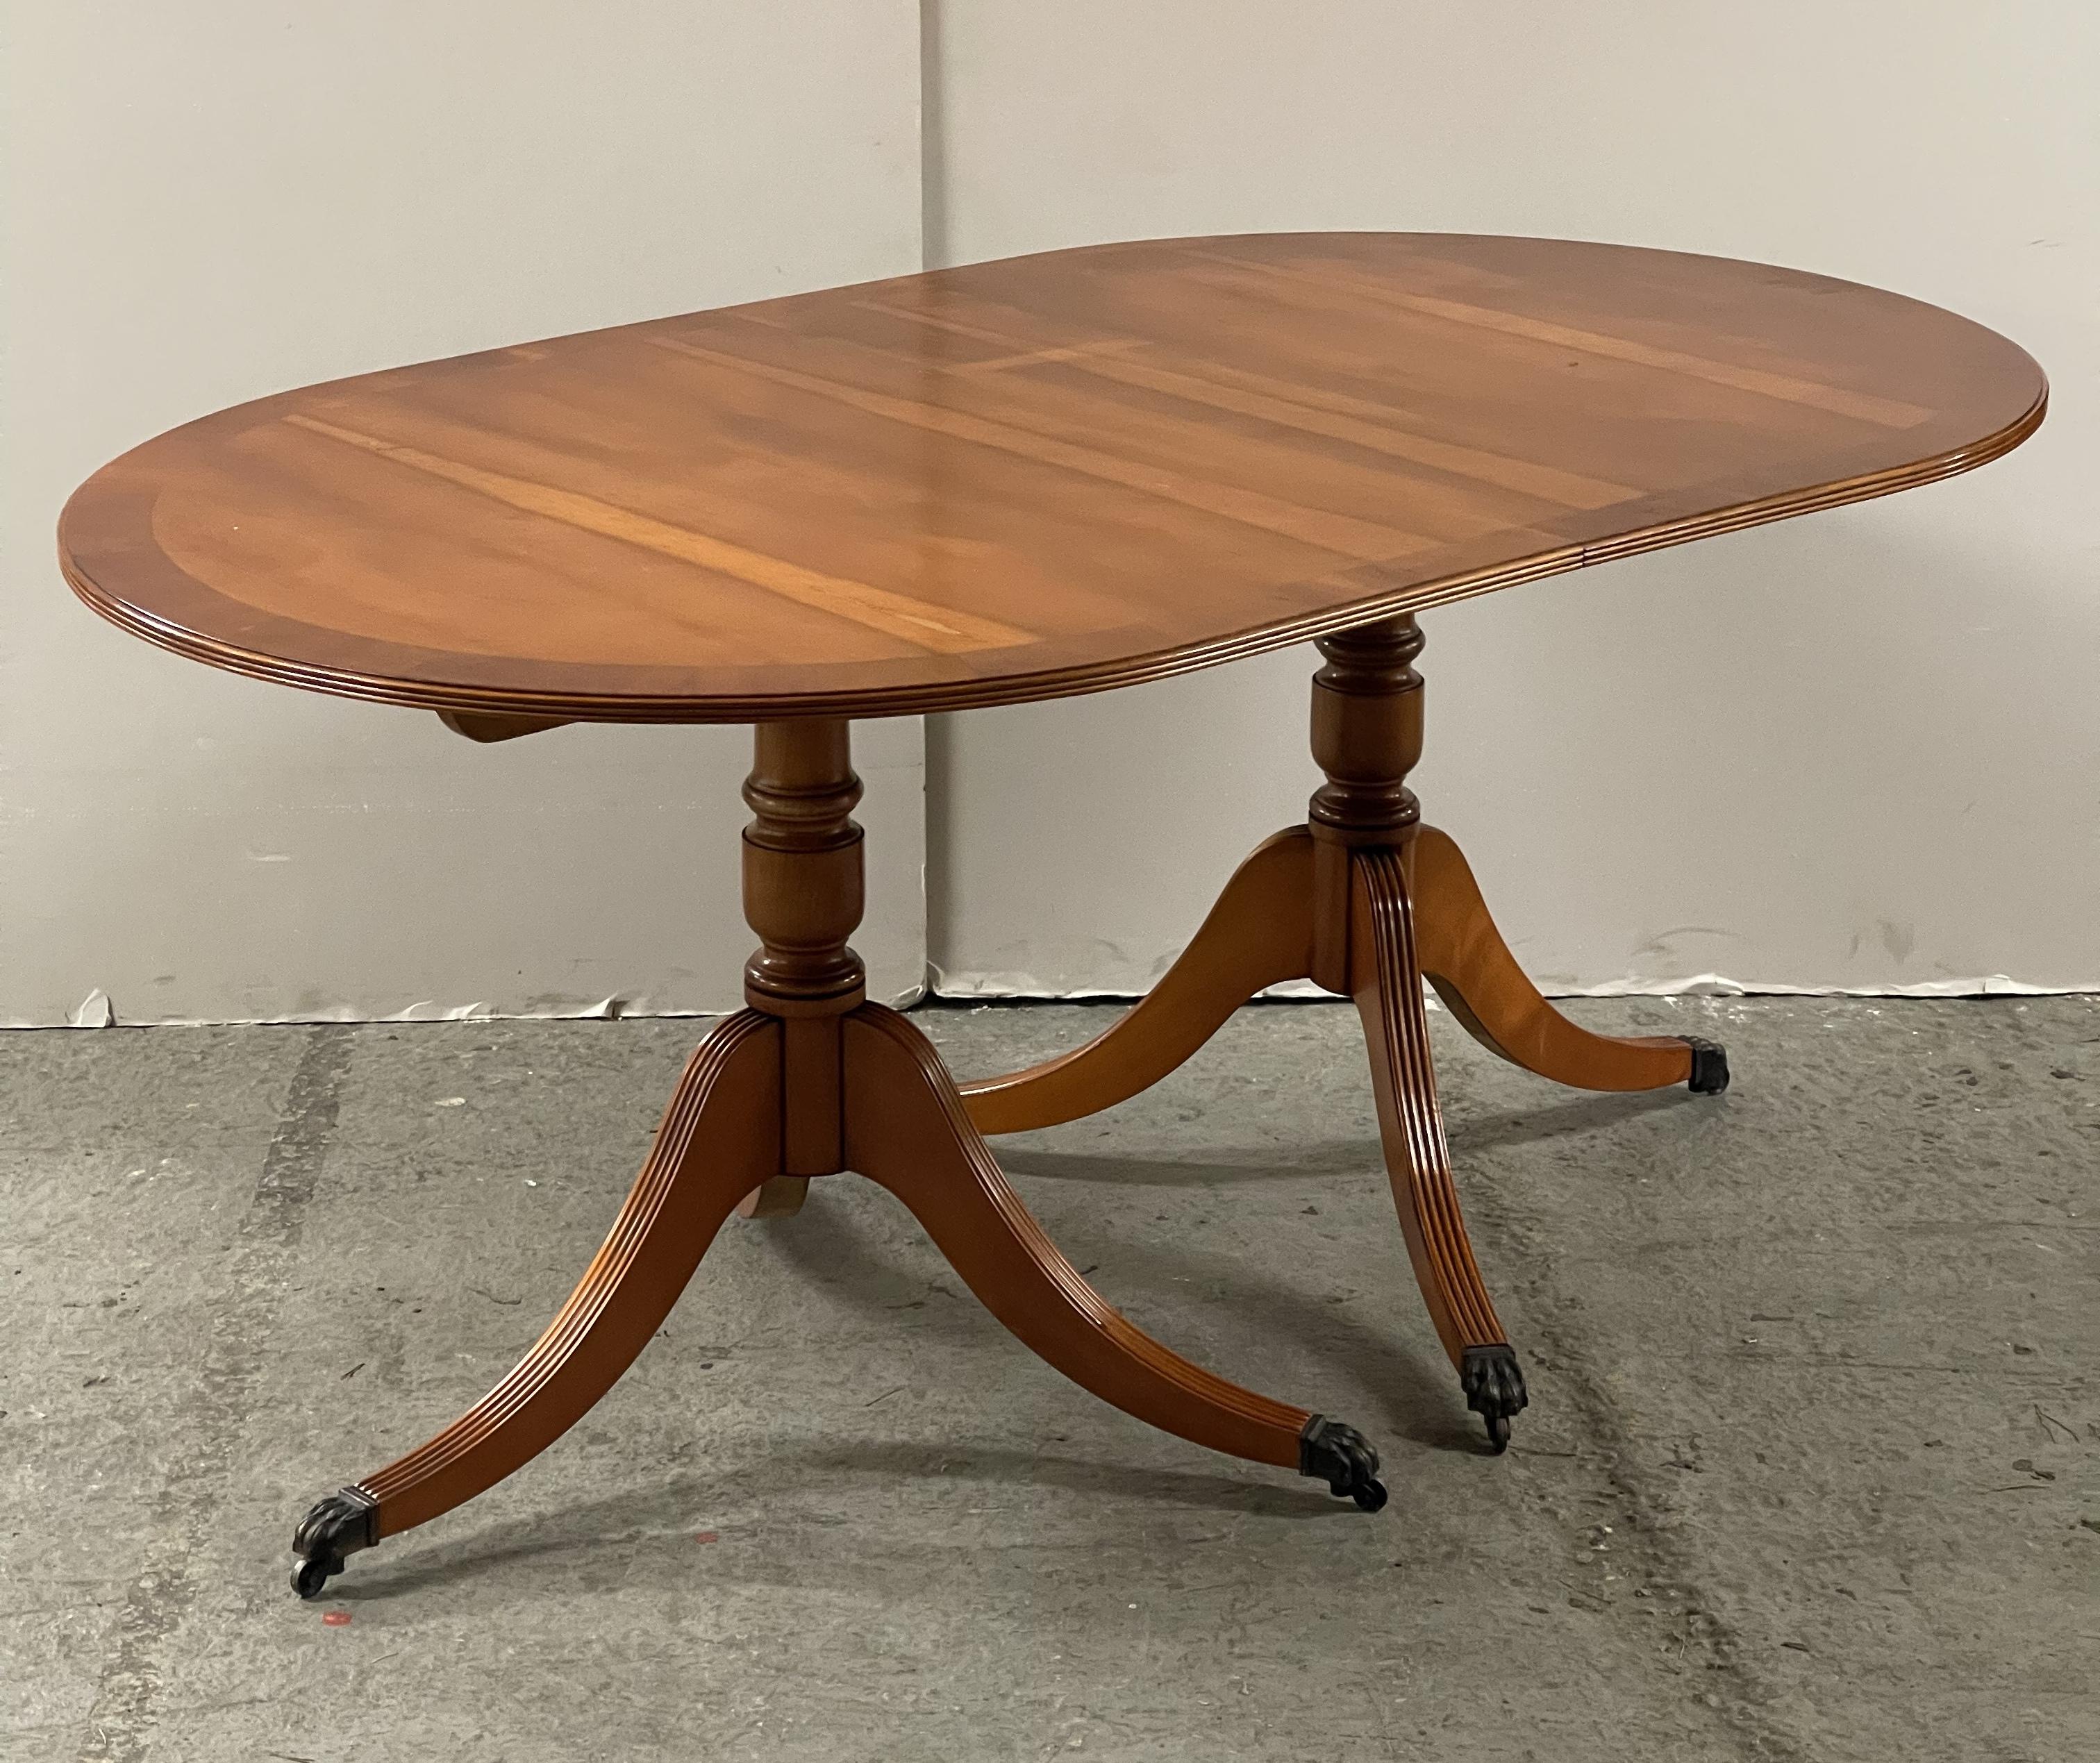 Here we have for sale this lovely vintage yew wood twin pedestal extending dining table seats 6-8 people.

This solid dining table can extend to comfortably seat 8 people standing on twin pedestals with claw feet detailing. It is in good condition